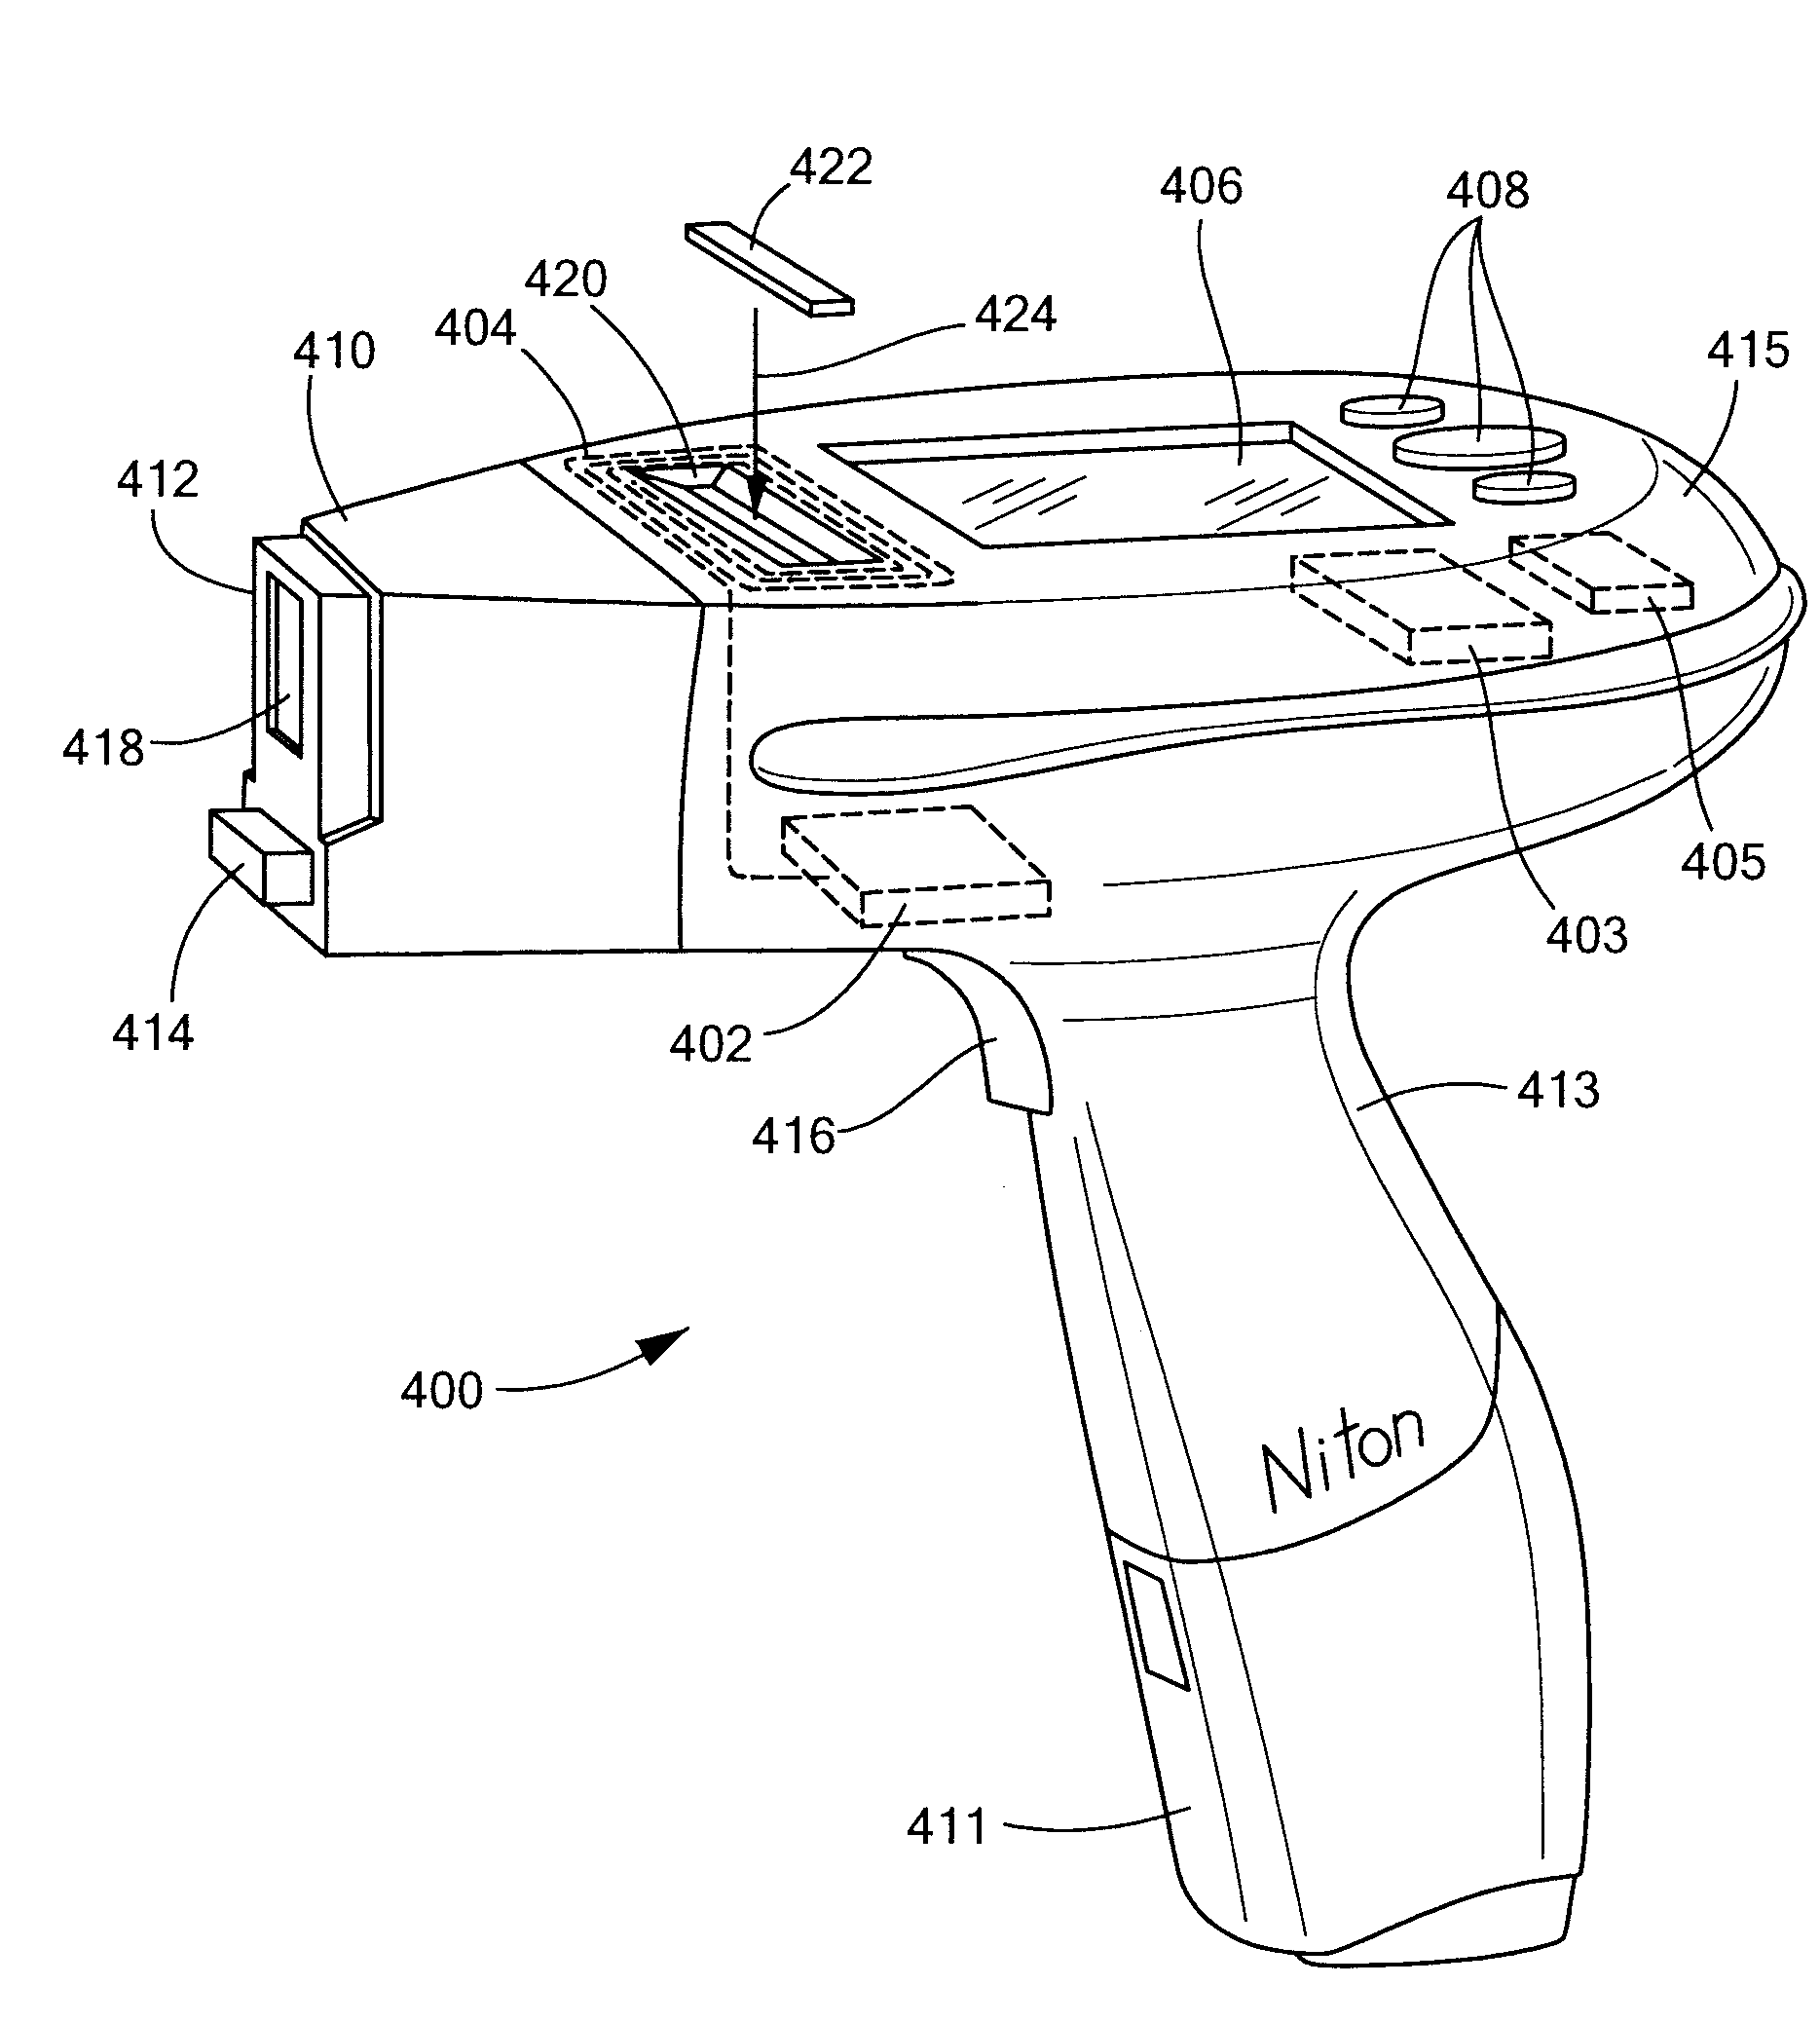 Contactless Memory Information Storage for Sample Analysis and Hand-Holdable Analyzer for Use Therewith